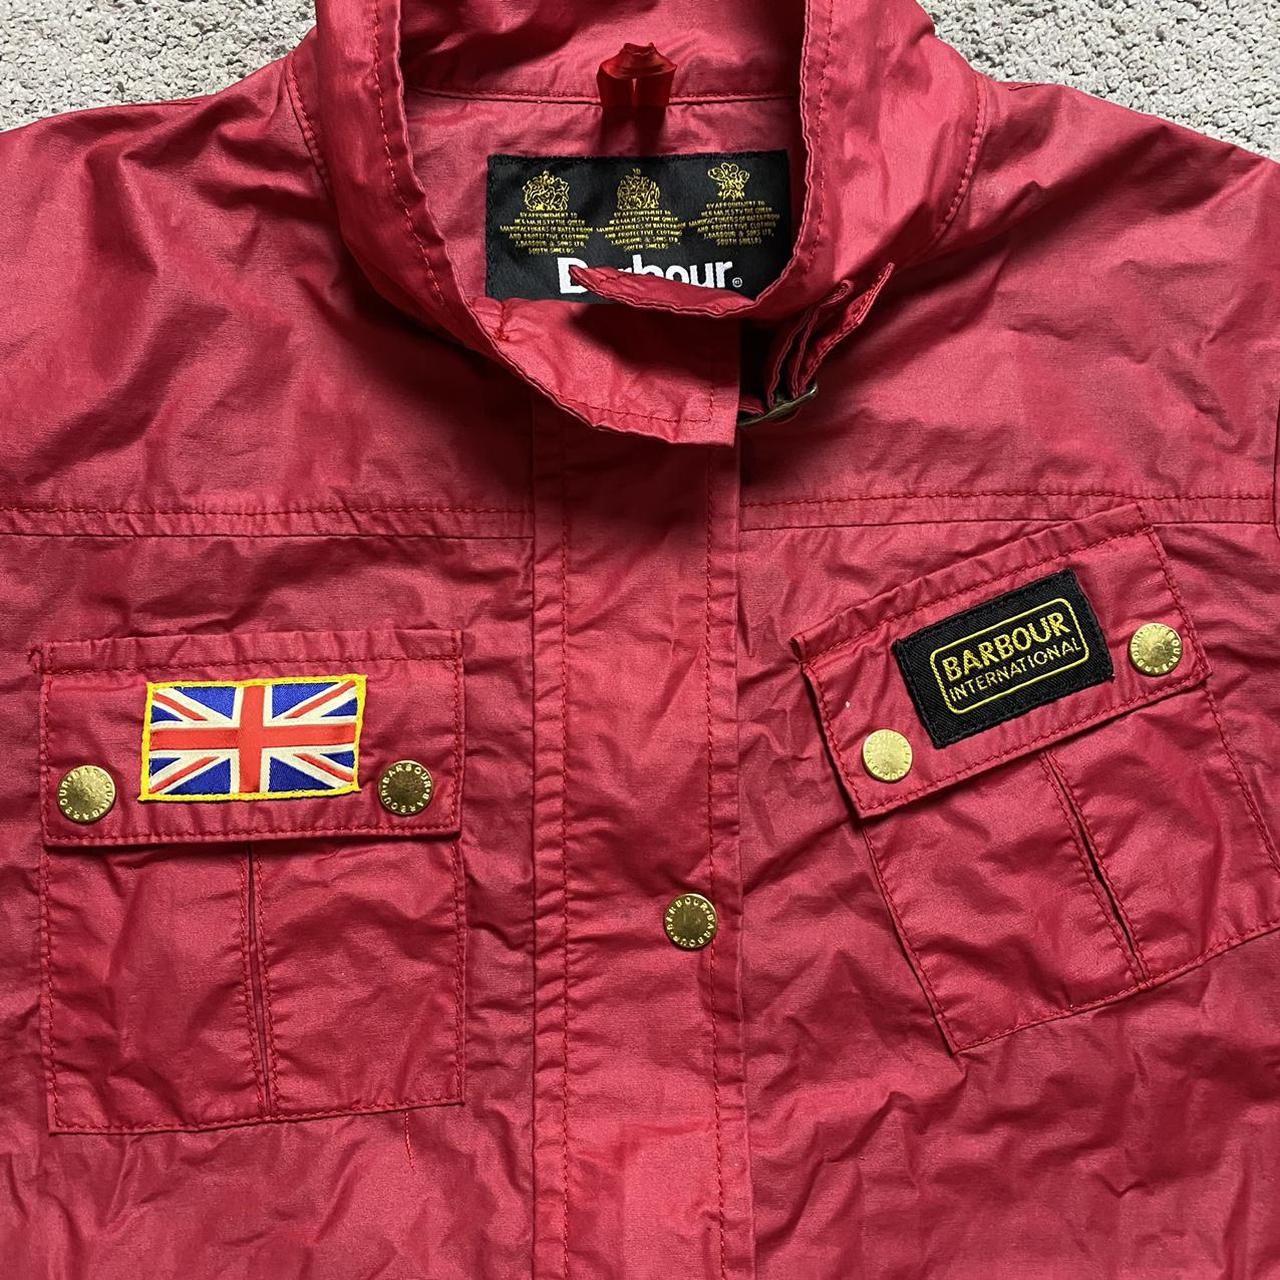 Product Image 3 - Women’s Barbour Union Jack red